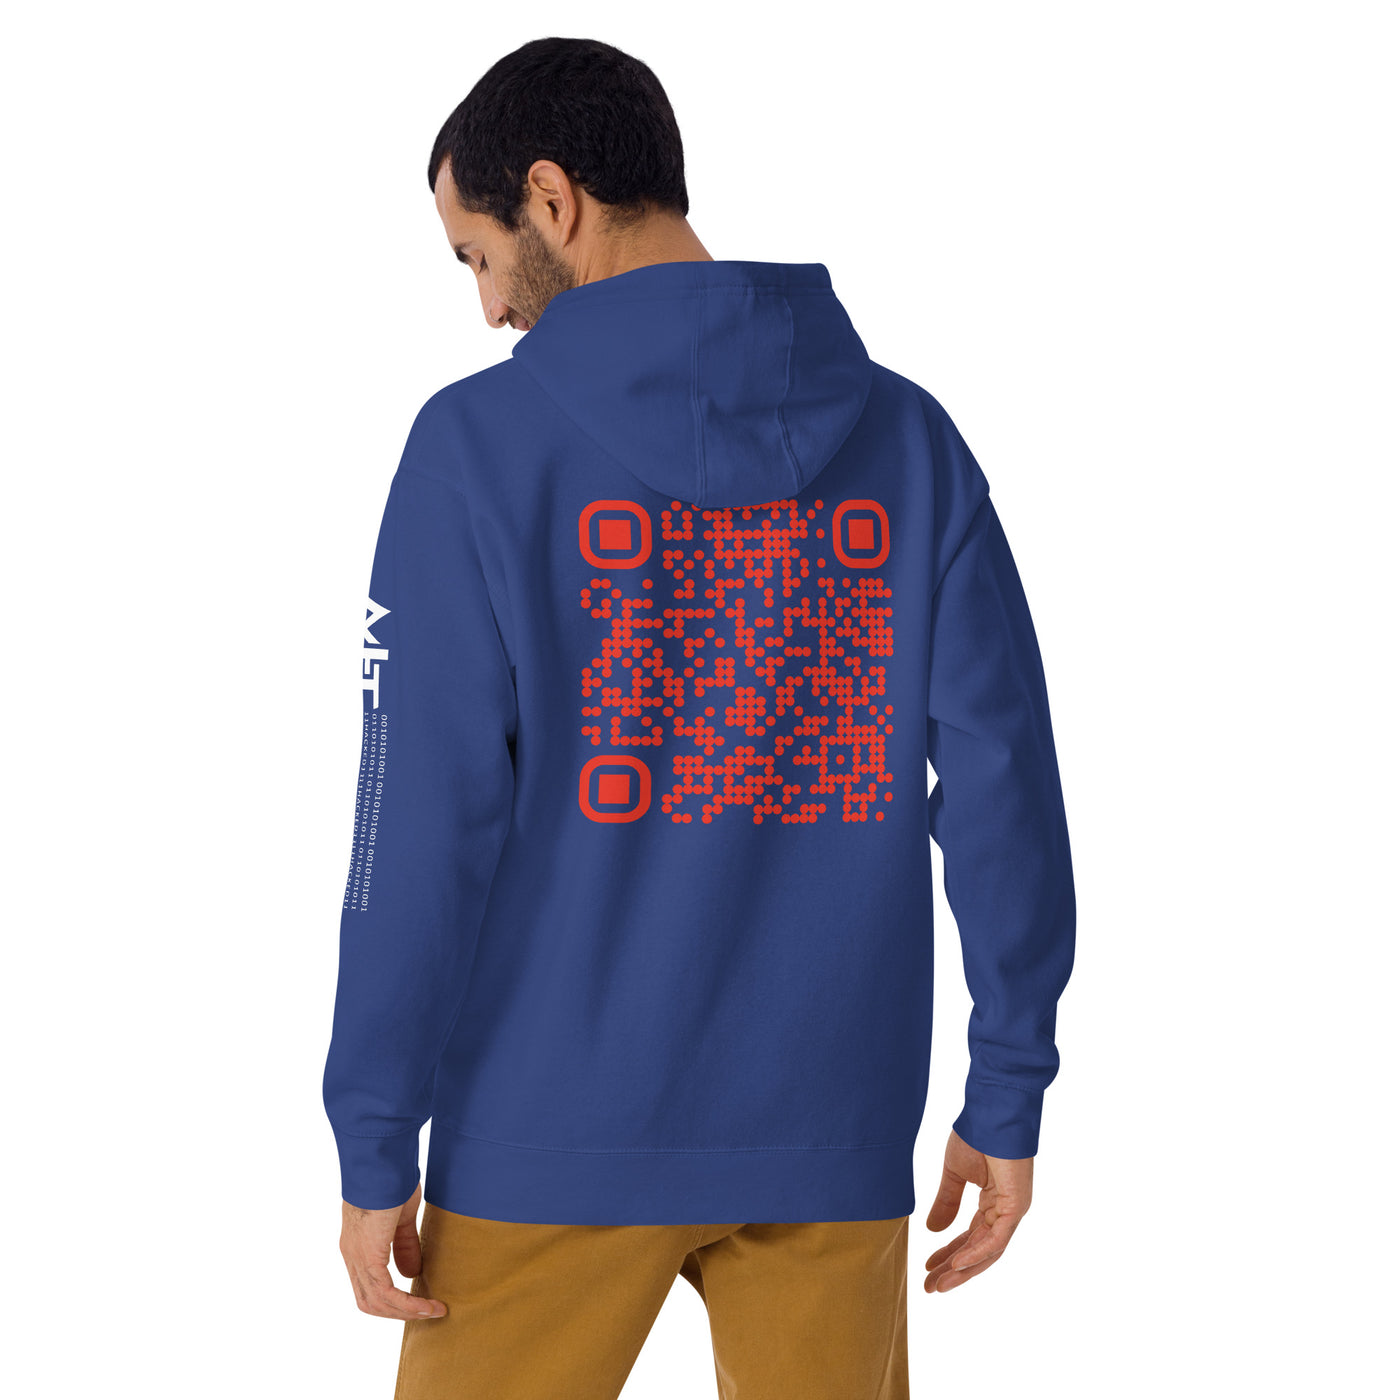 Who's the New Kid, Hacker, Developer, Gamer, Crypto King (Red Cyber) - Unisex Hoodie Personalized QR Code